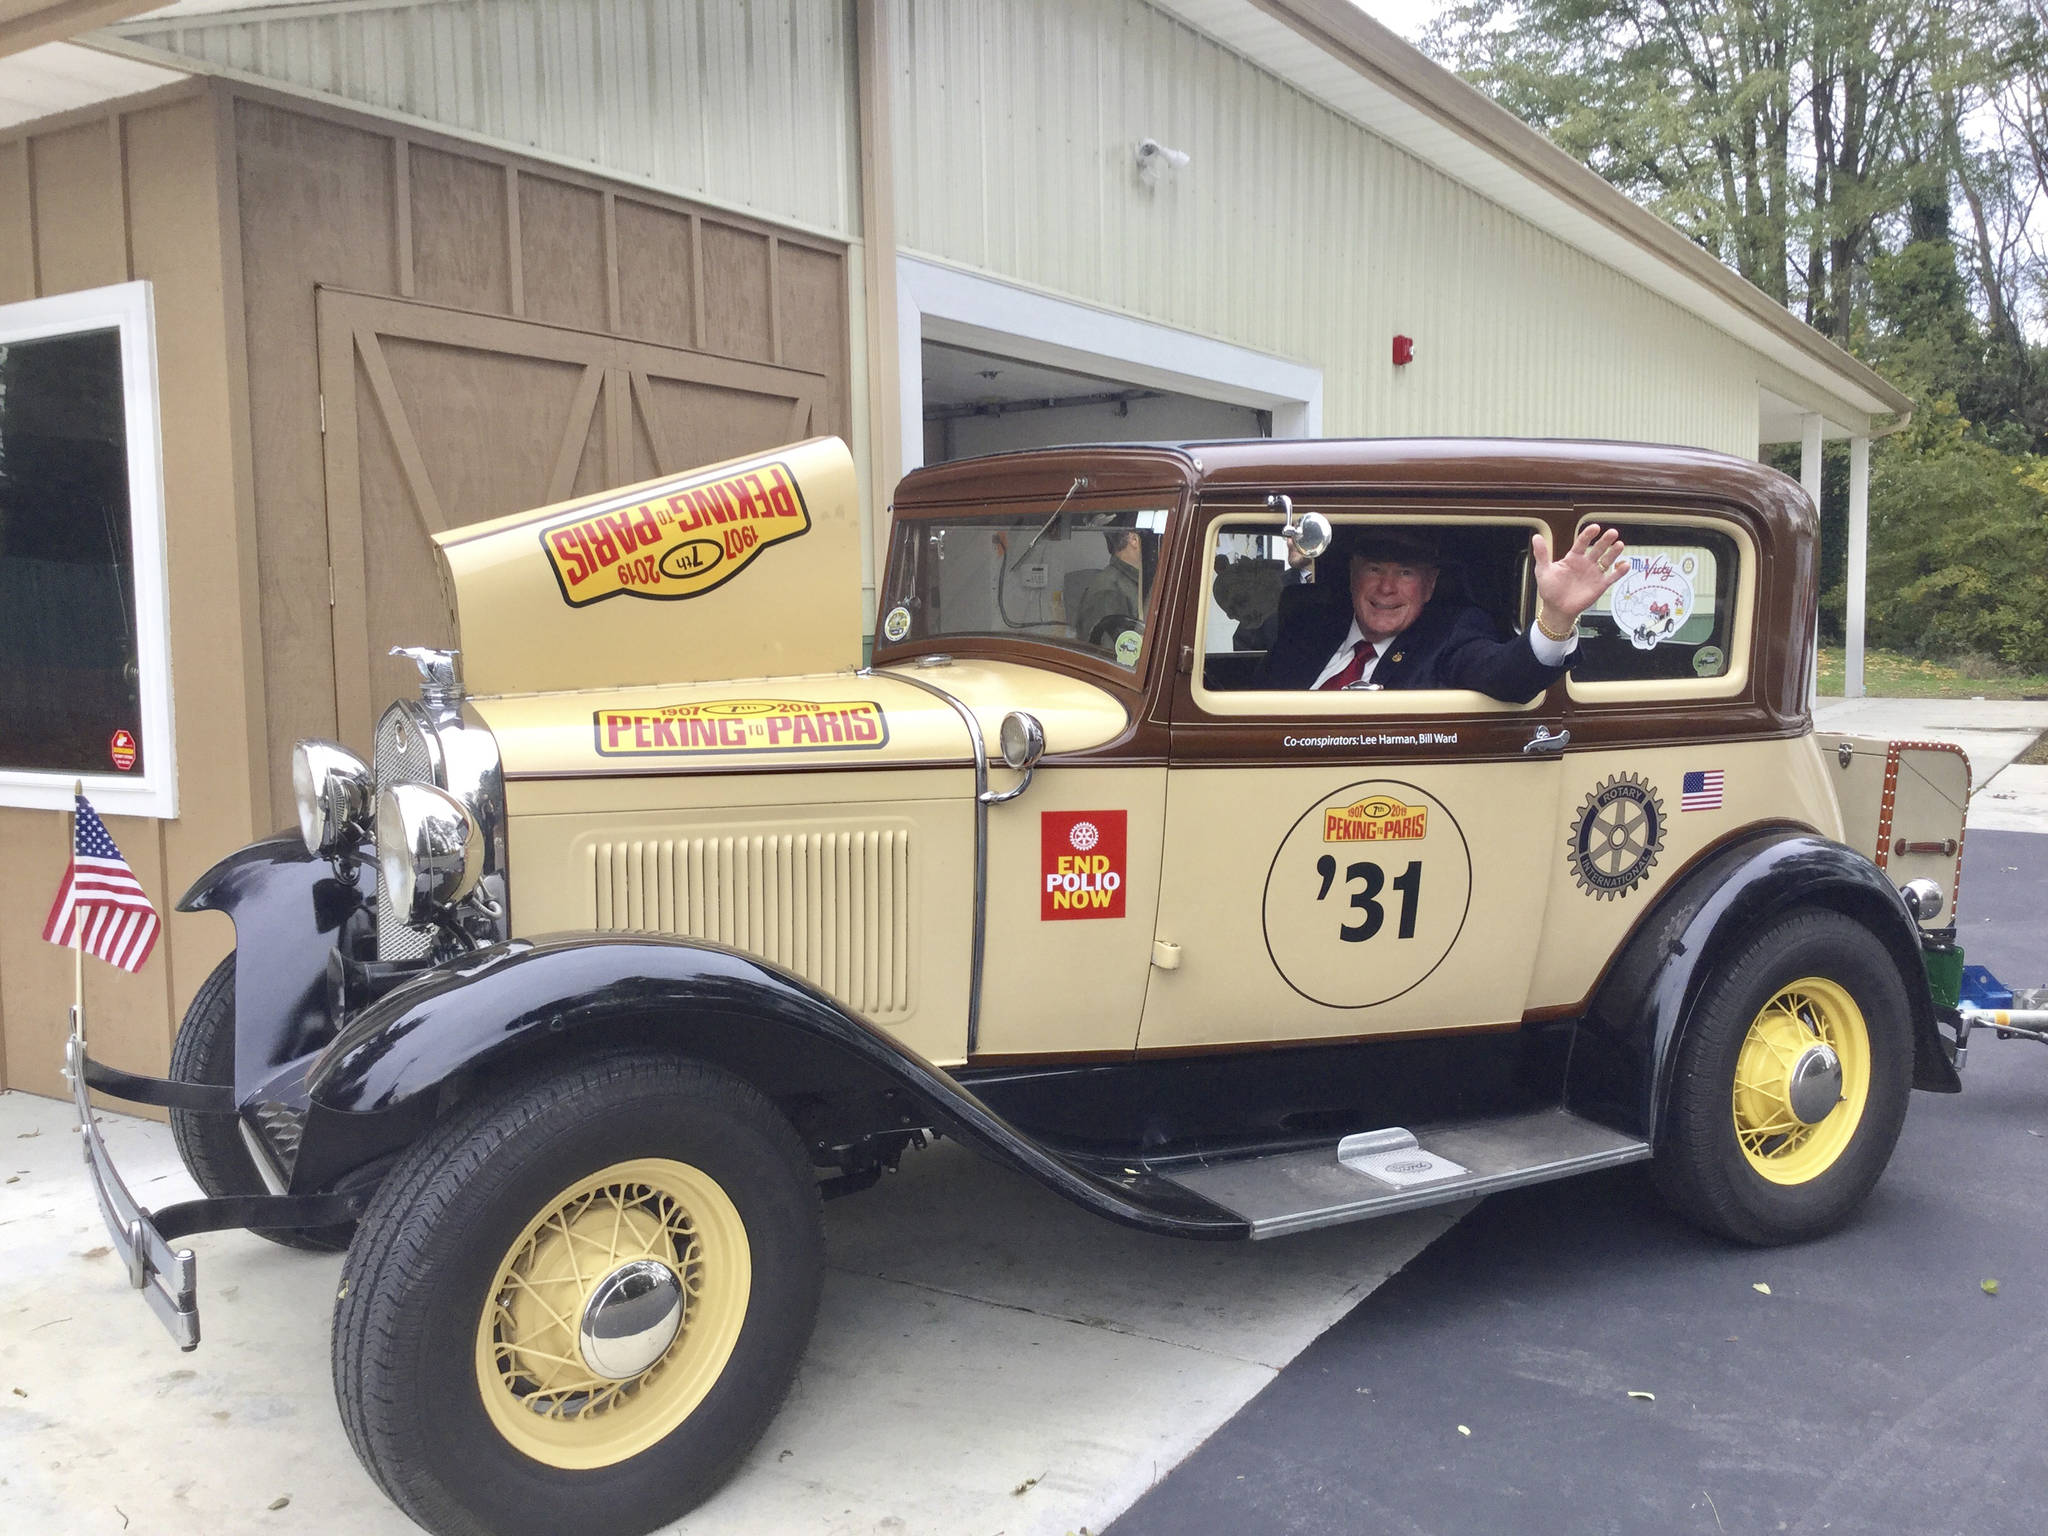 Arlington Rotarian Lee Harman will be driving “Miss Vicky,” a 1938 Model A Ford Victoria, in the 10,000-mile Peking to Paris Endurance Motor Challenge to raise $1 million toward eradicating polio.